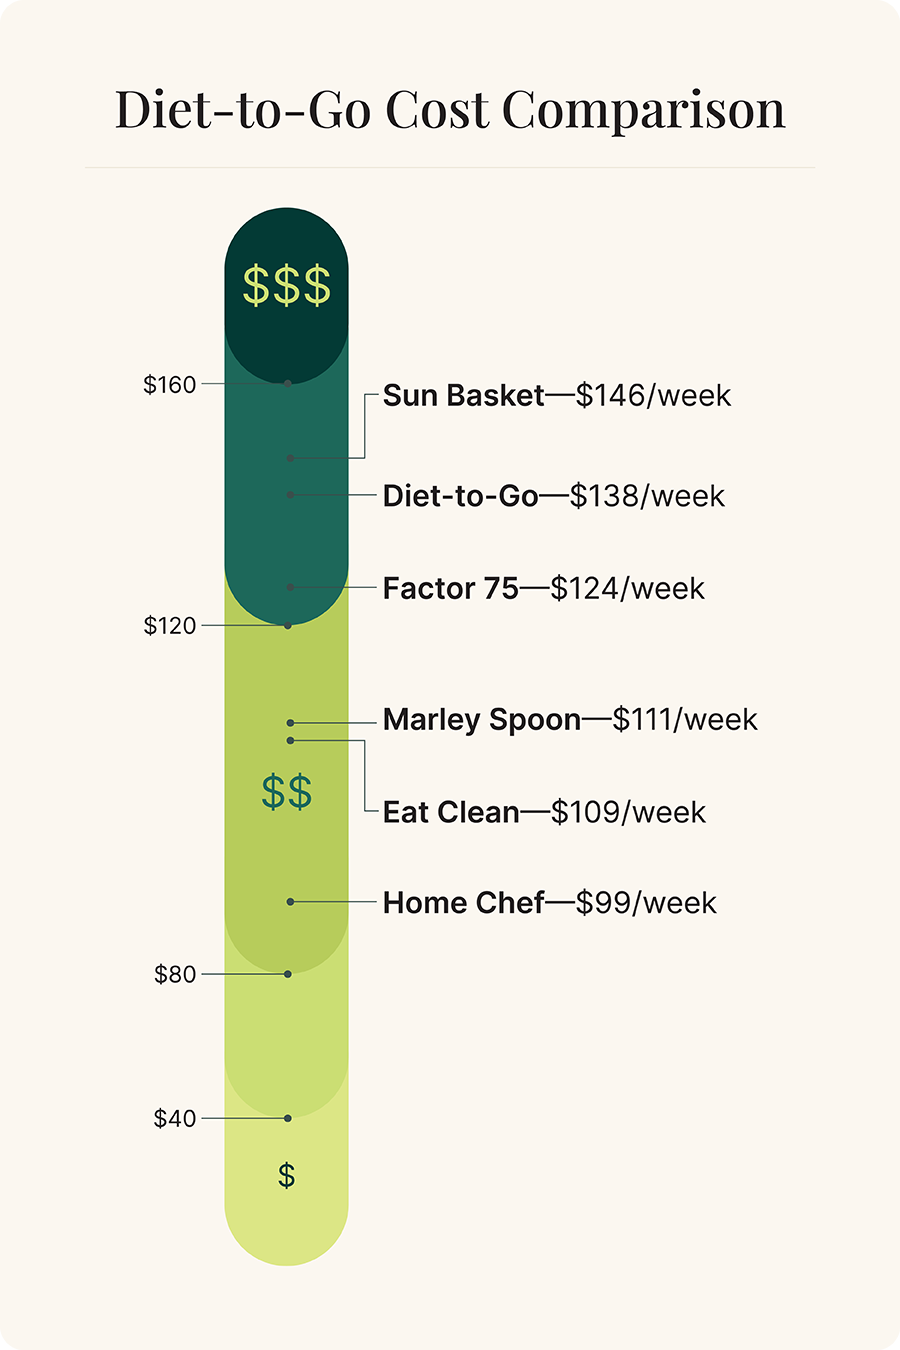 A cost comparison of Diet-to-Go compared to other similar platforms